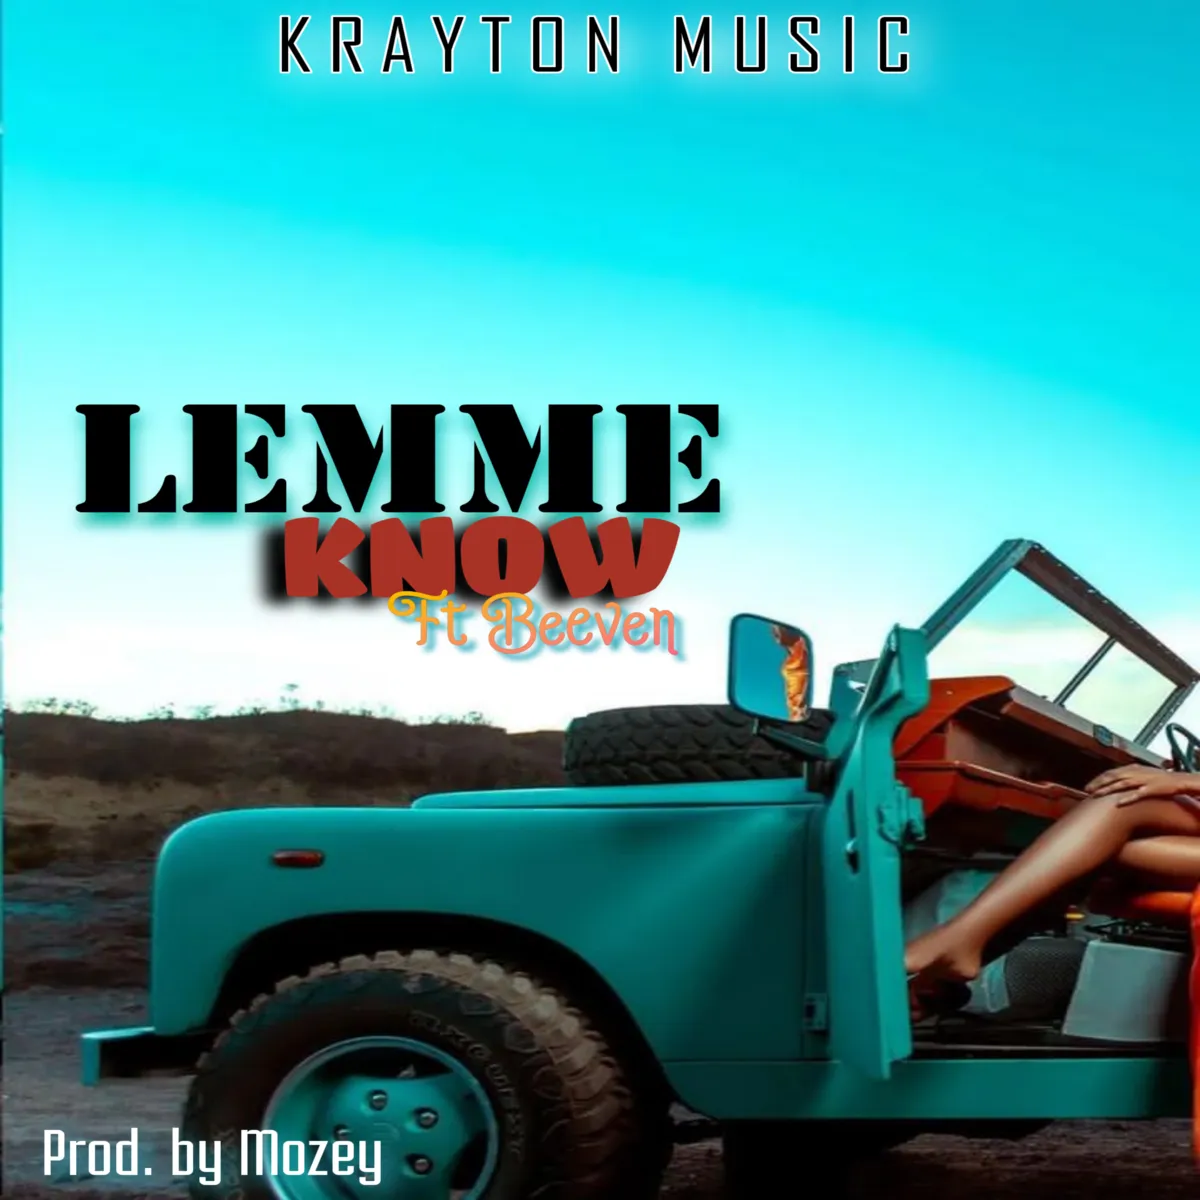 Uganda's Versatile Singer &amp; Songwriter Krayton teams up with Beeven Music to release an afropop Love Song titled&quot;Lemme Know&quot;